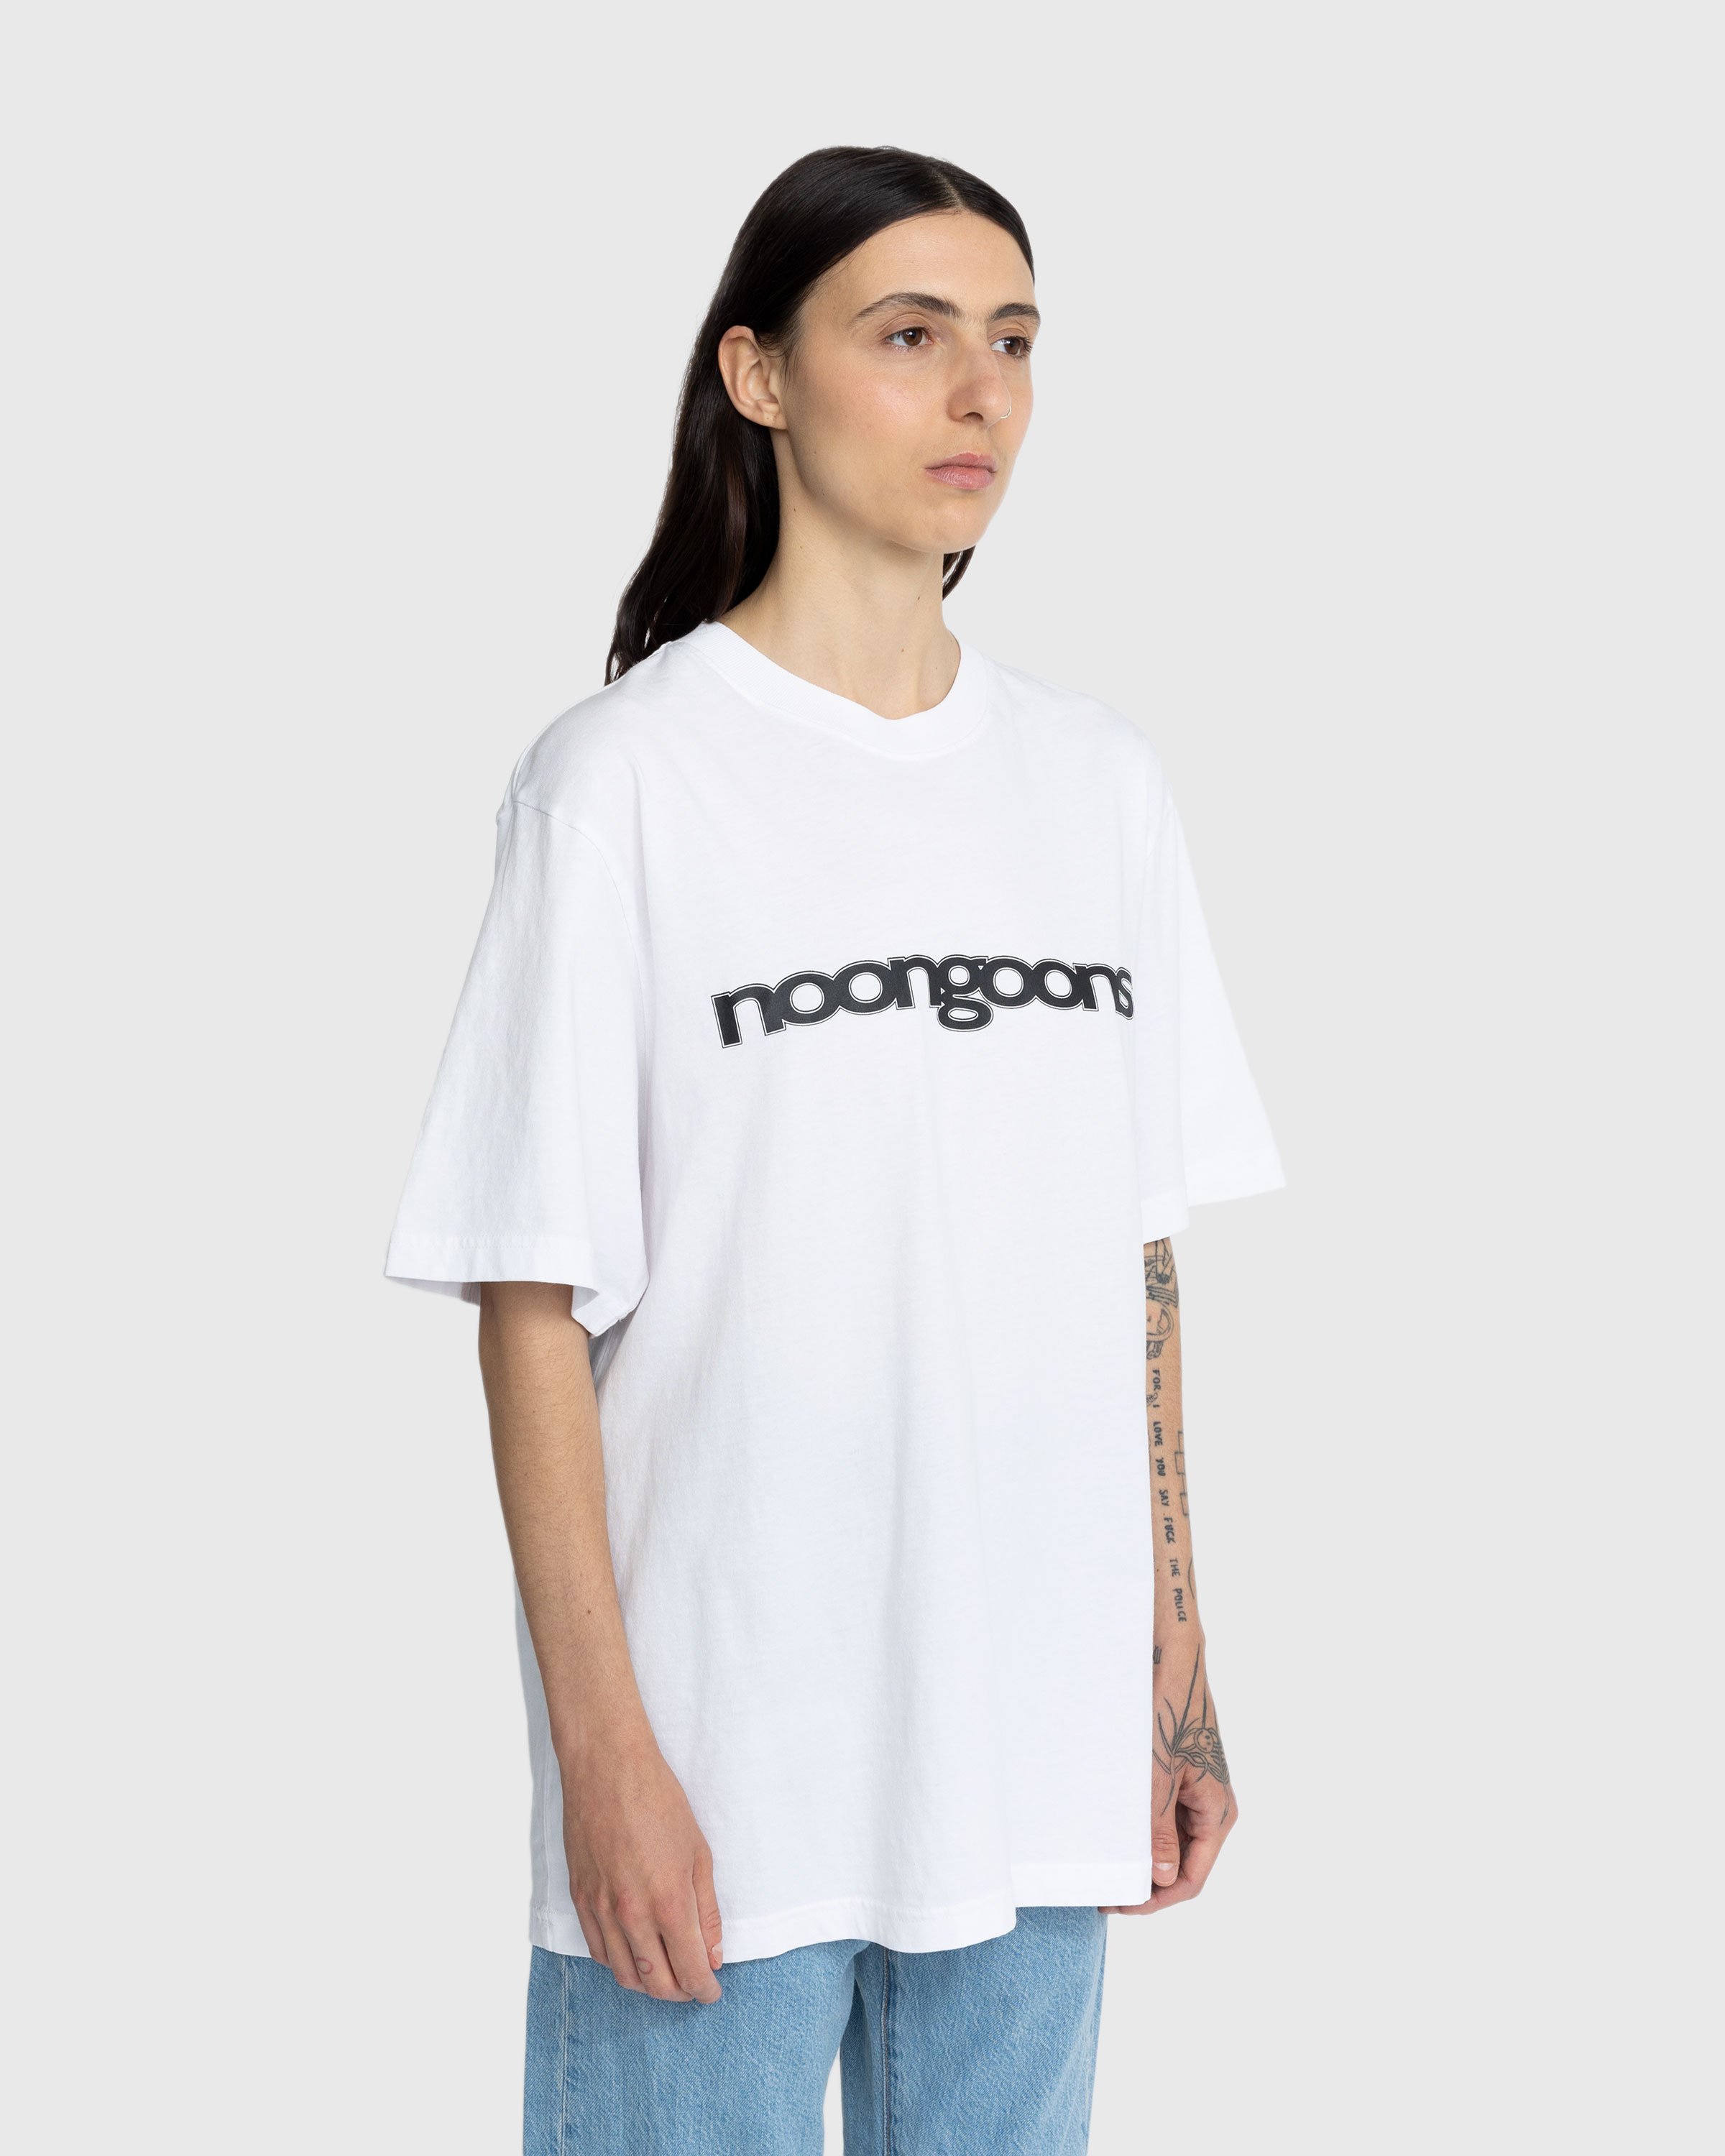 Noon Goons - Very Simple T-Shirt White - Clothing - White - Image 4